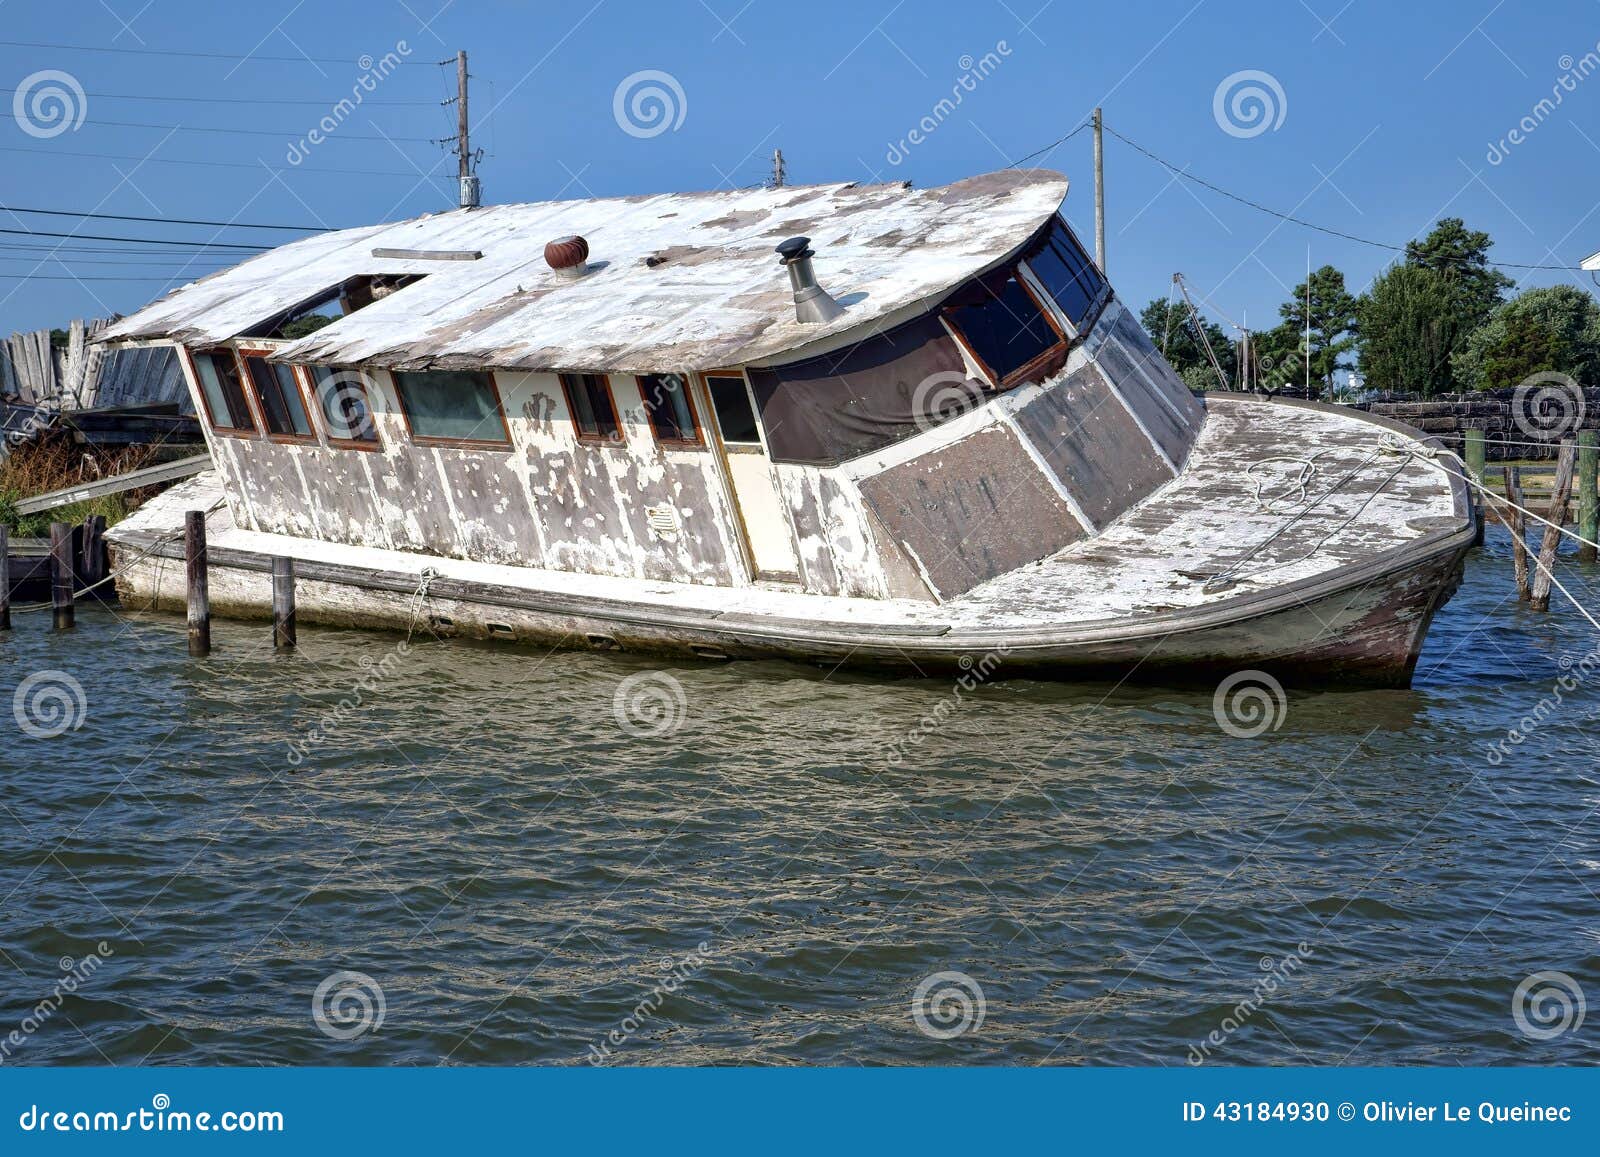 Abandoned Derelict Boat Sinking After Hurricane Stock ...